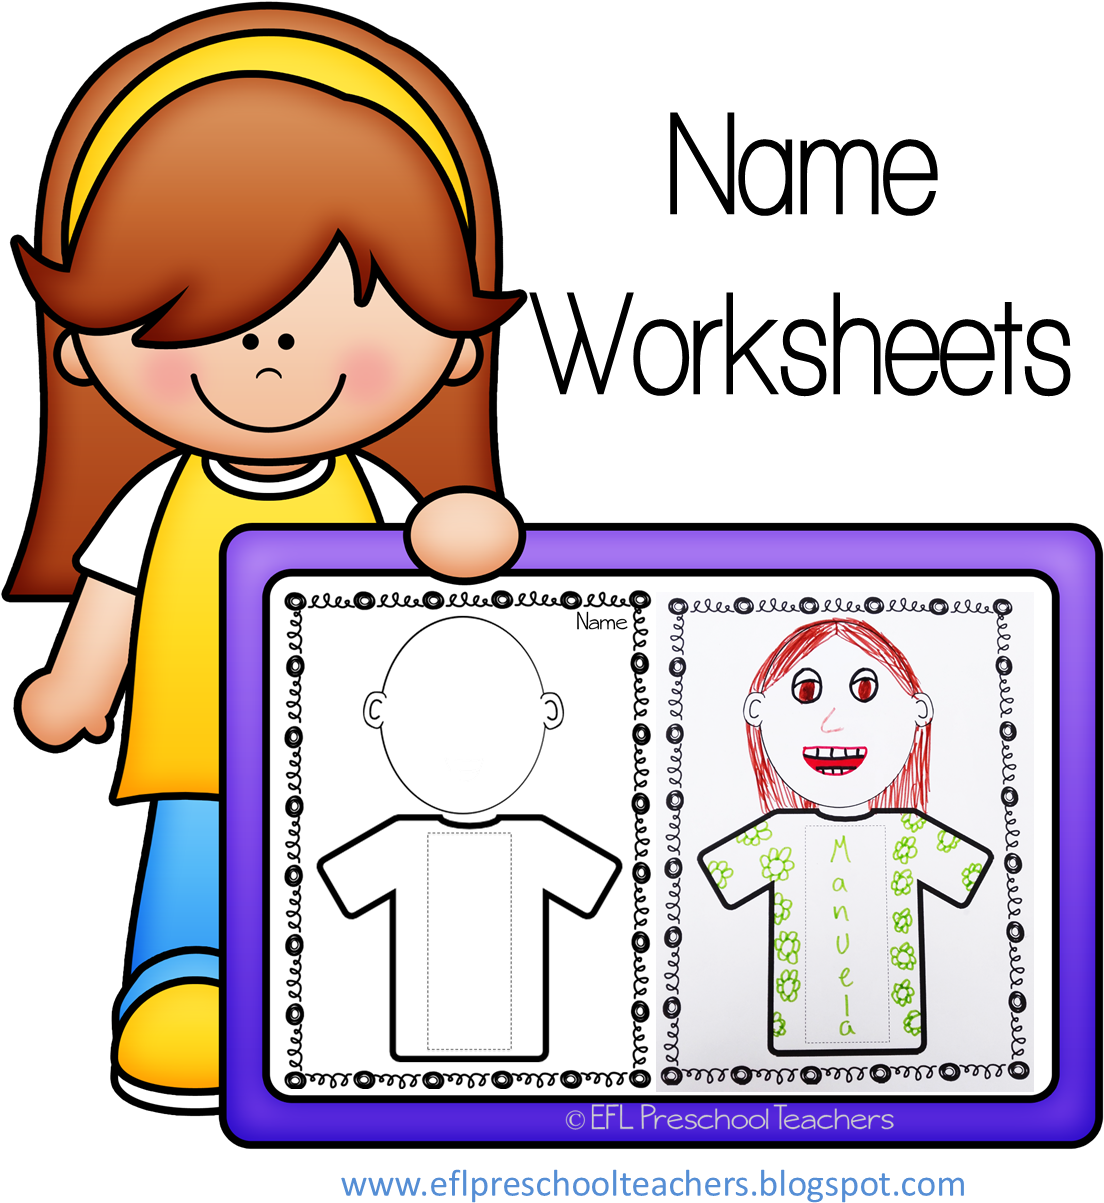 Print The Numbers And Line Them Up On The Board - Cchildren Border Design Clipart (1177x1242)